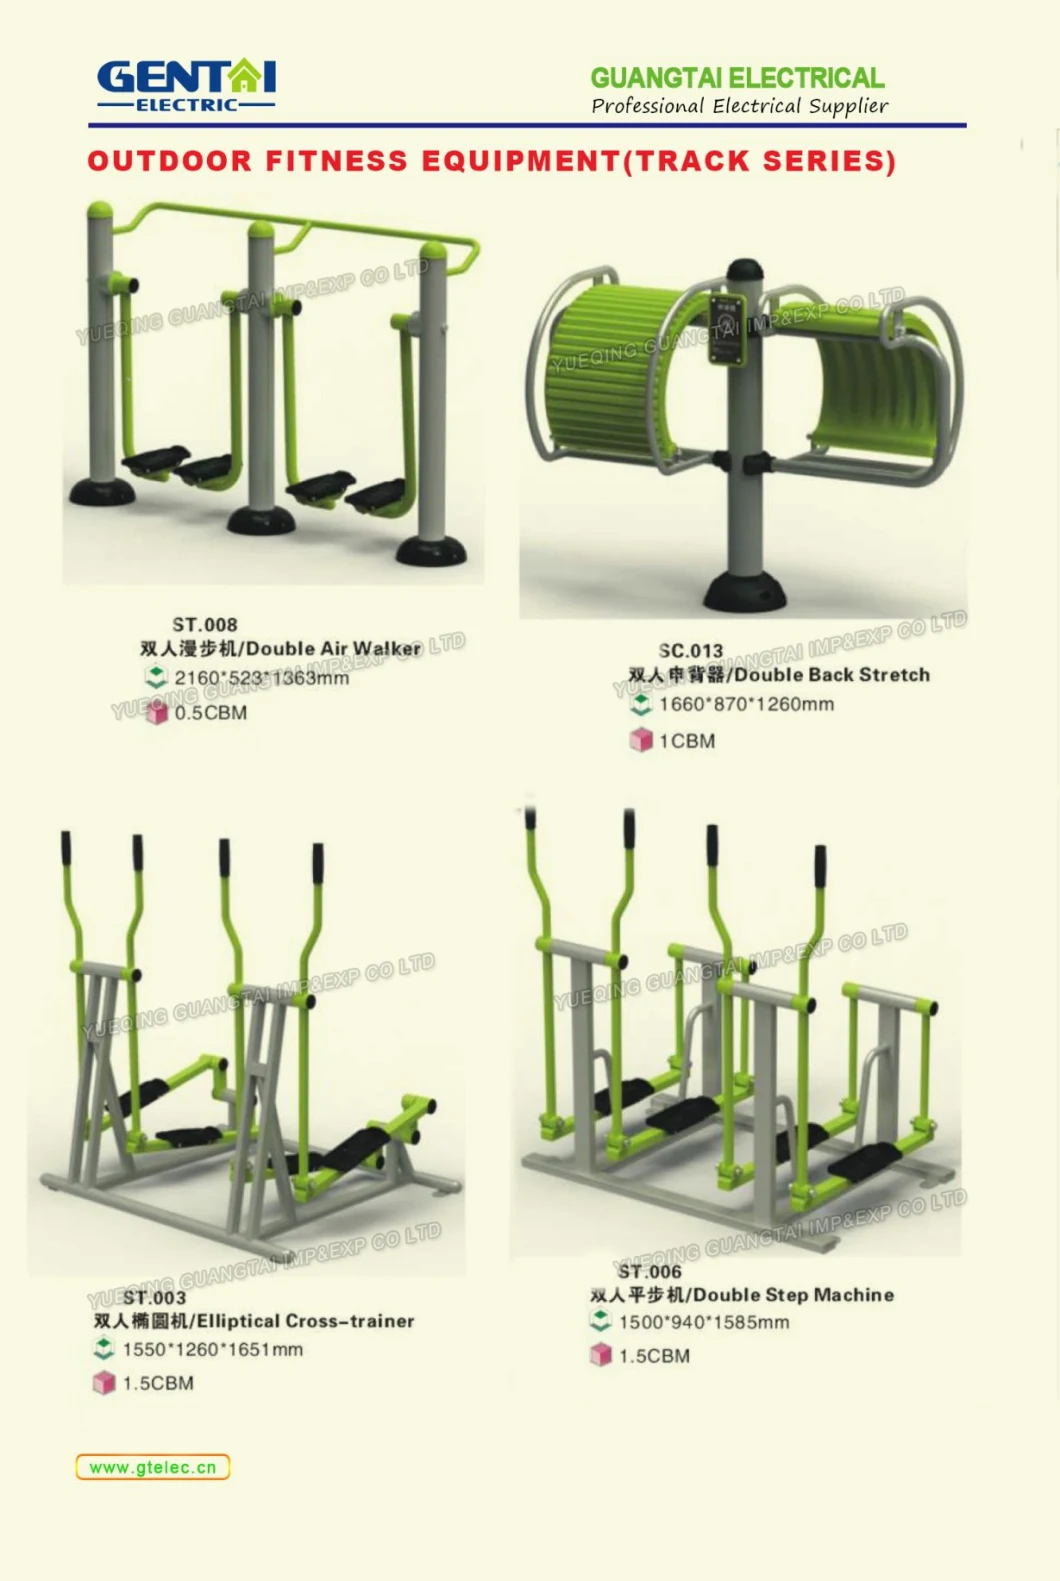 Durable Hydraulic Outdoor Fitness Equipment 9-Positions Ajustable/Adjustable Fitness Equipment